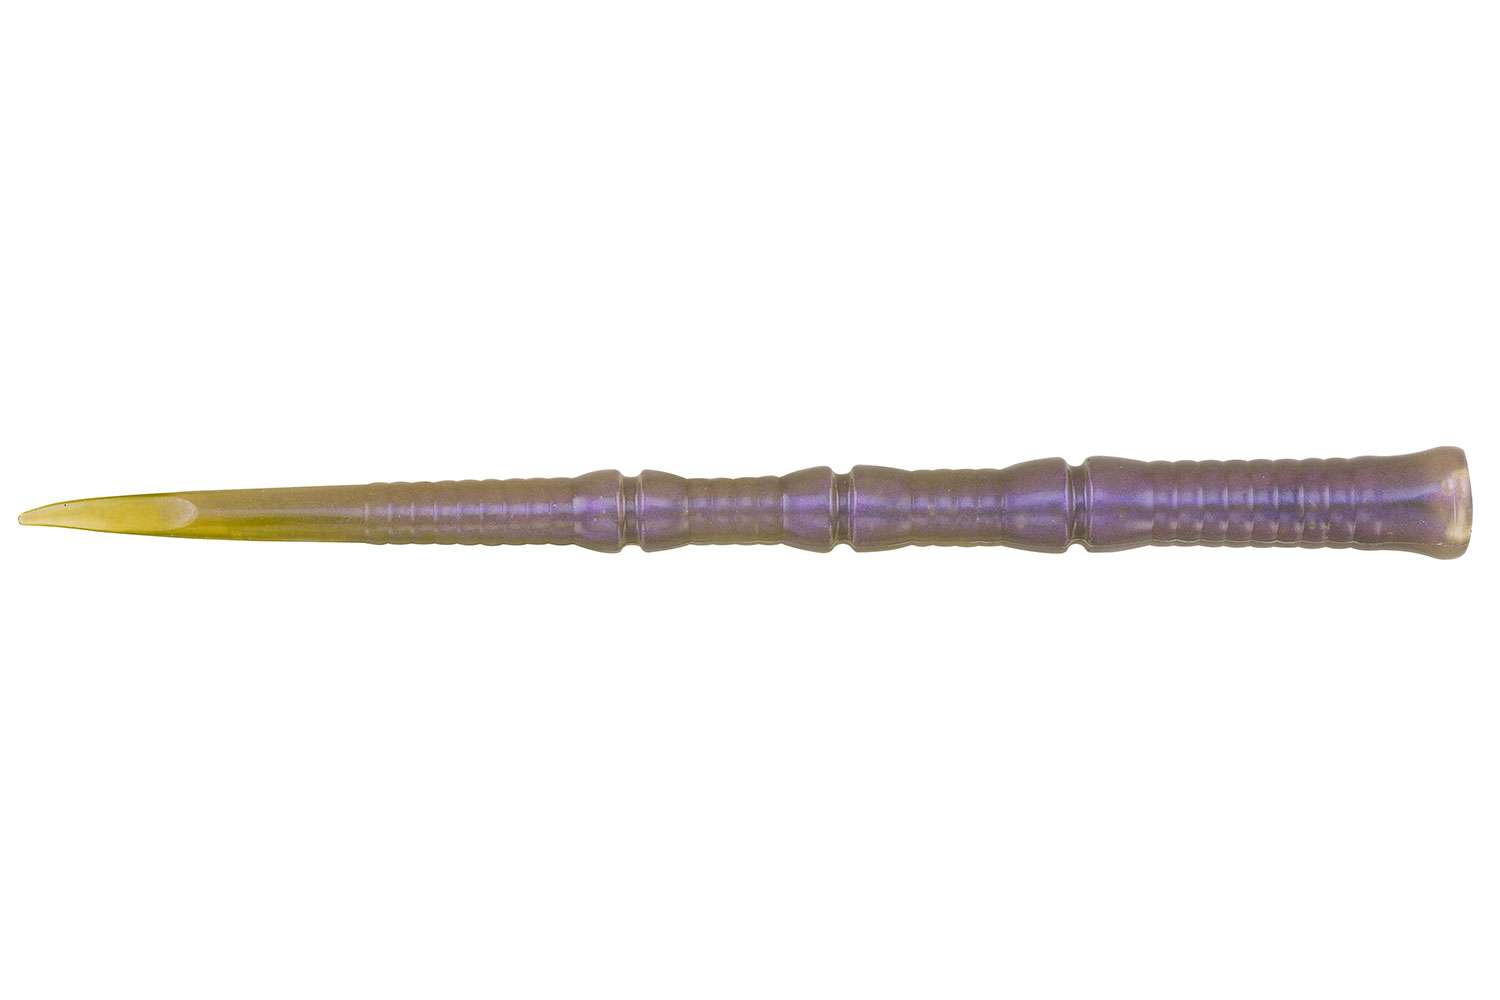  <B>Berkley PowerBait Flute Worm </B>
<BR>This tapered flute tail bait twitches and moves with the subtlest movements was designed by pro angler, Mike Iaconelli. It features a blunt head and integrated location for inserting weights and stops the bottom when hopping on a Neko rig and comes in 12 colors.